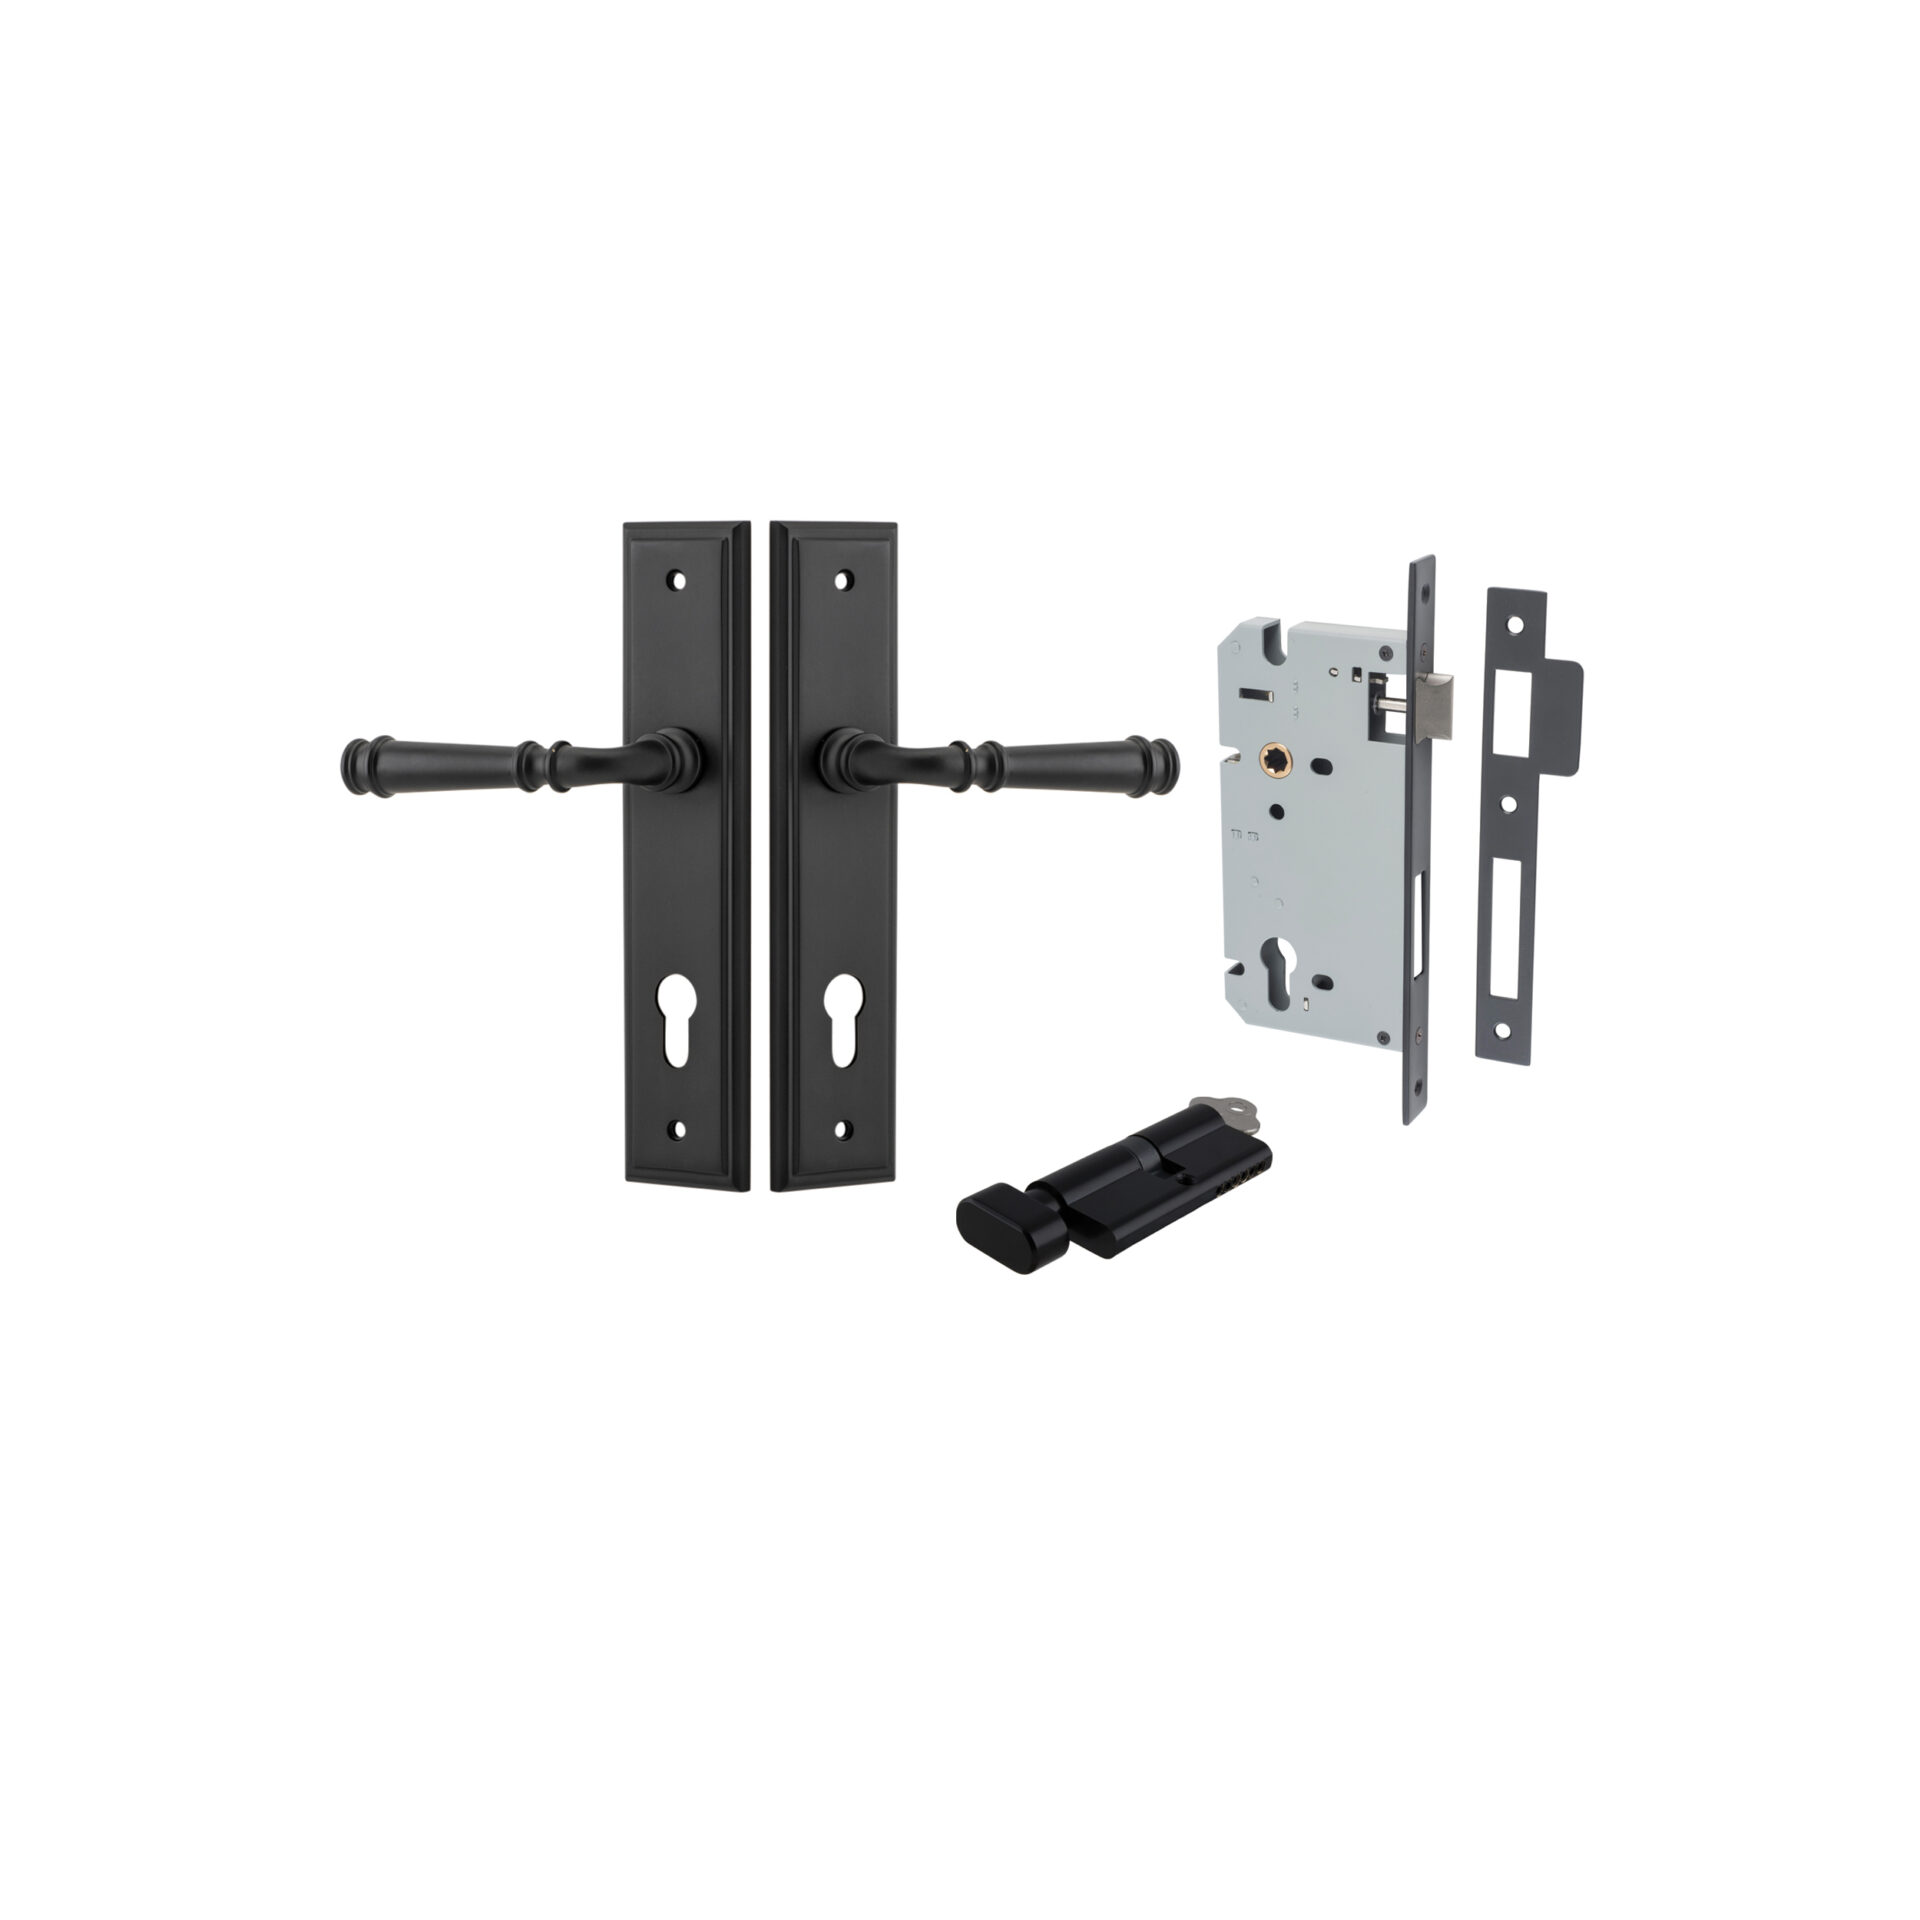 Verona Lever - Stepped Backplate Entrance Kit with High Security Lock